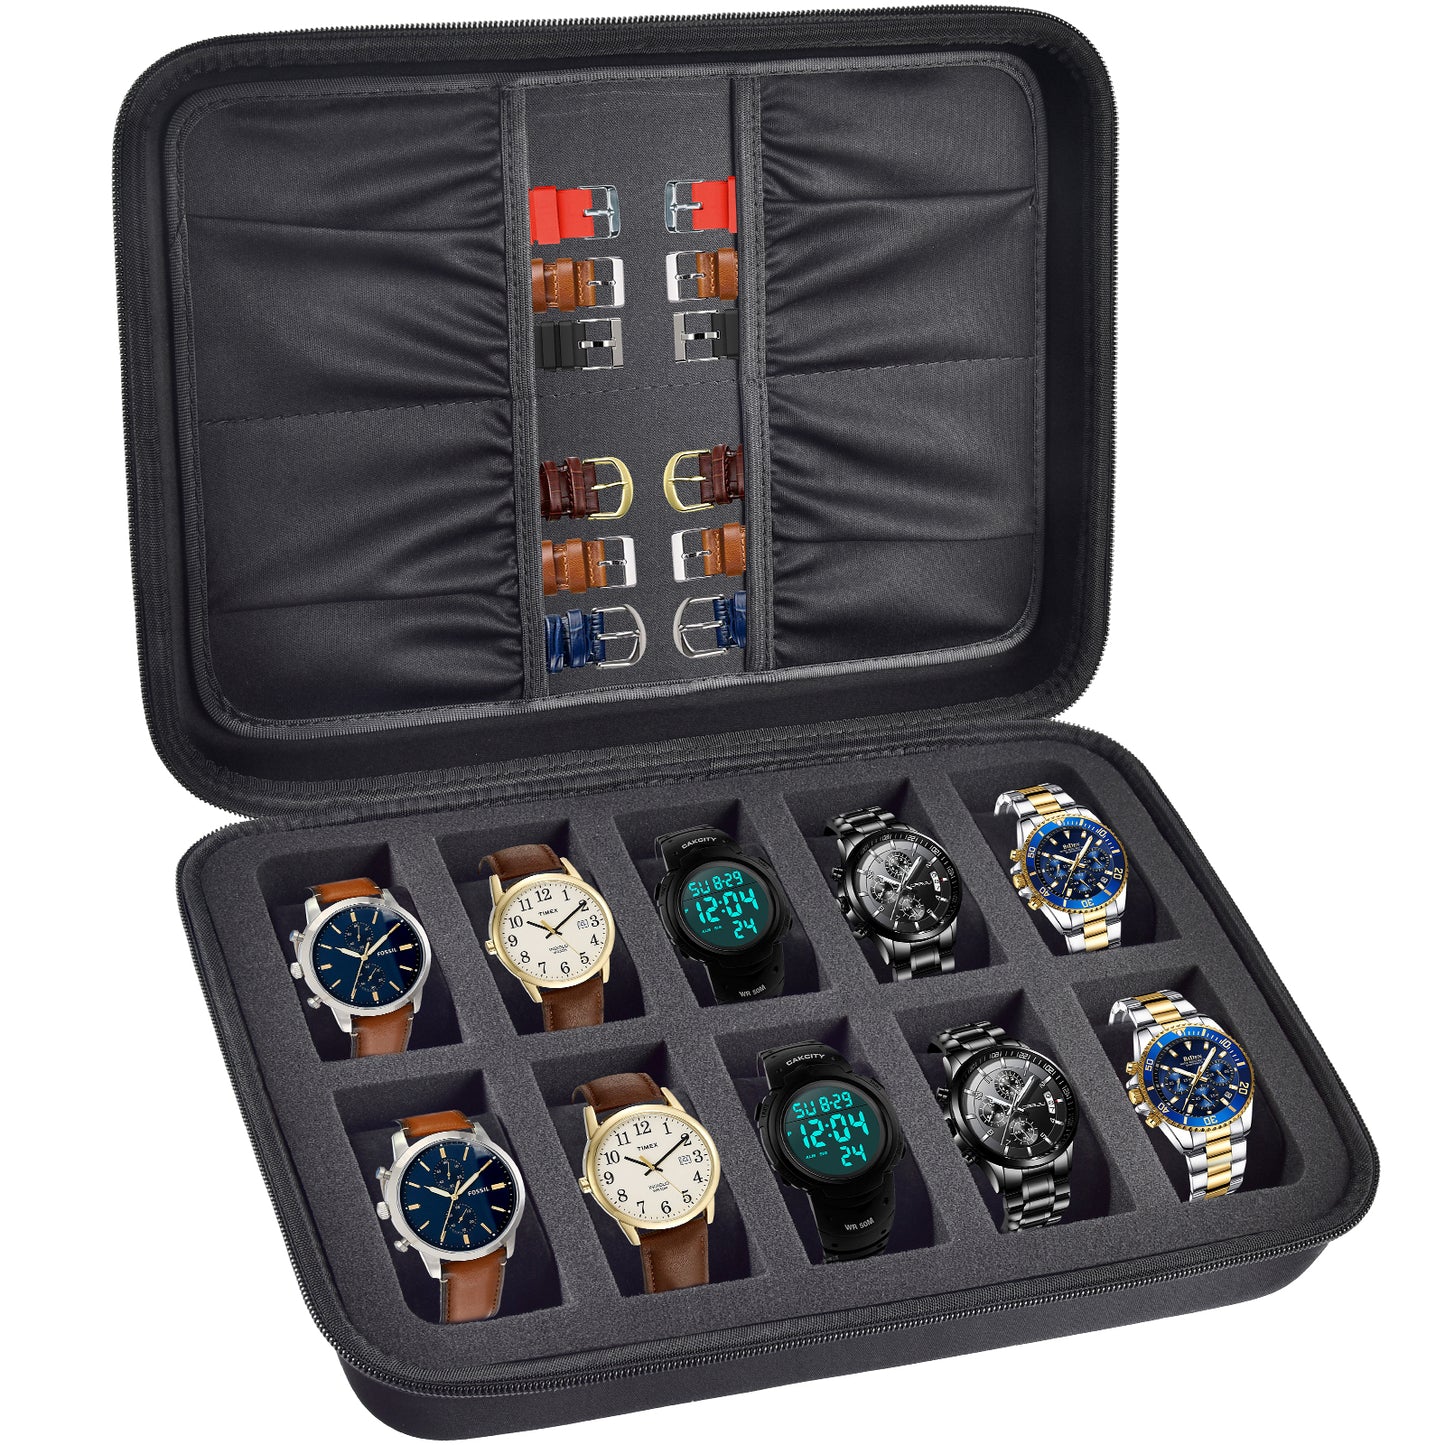 Watch Box Organizer Case, 10 Slots Men Women Display Holder Storage Stand Roll for All Wristwatches, Digital Sports, Smartwatches 42mm, Accessories Pocket for Watch Bands, Cufflink, Jewelry (Bag Only)